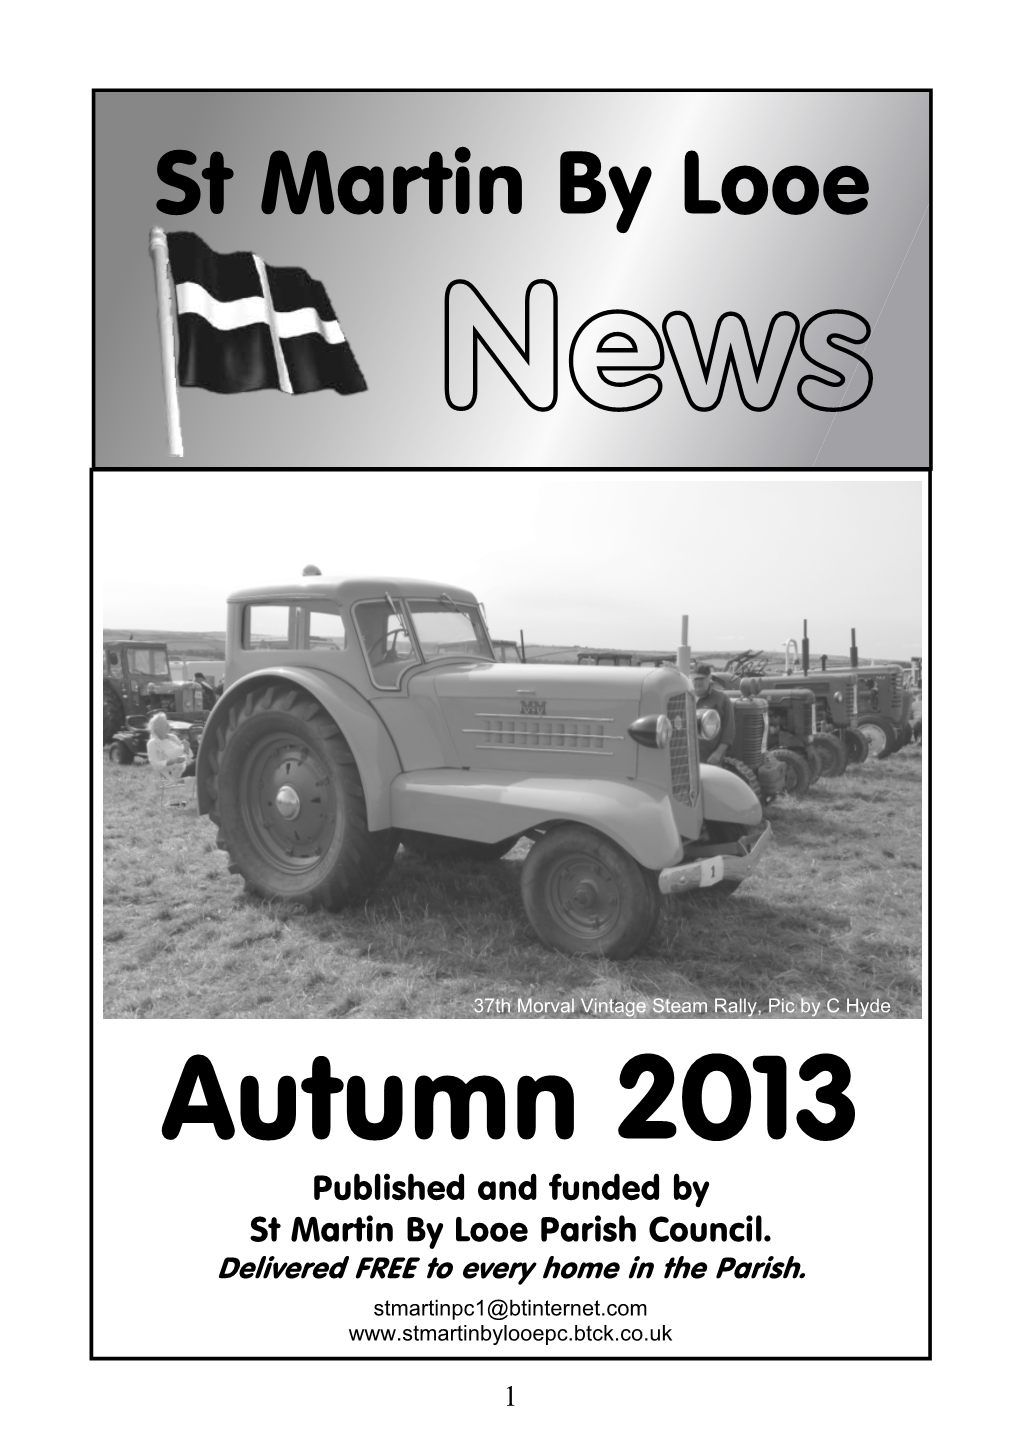 Autumn 2013 Published and Funded by St Martin by Looe Parish Council